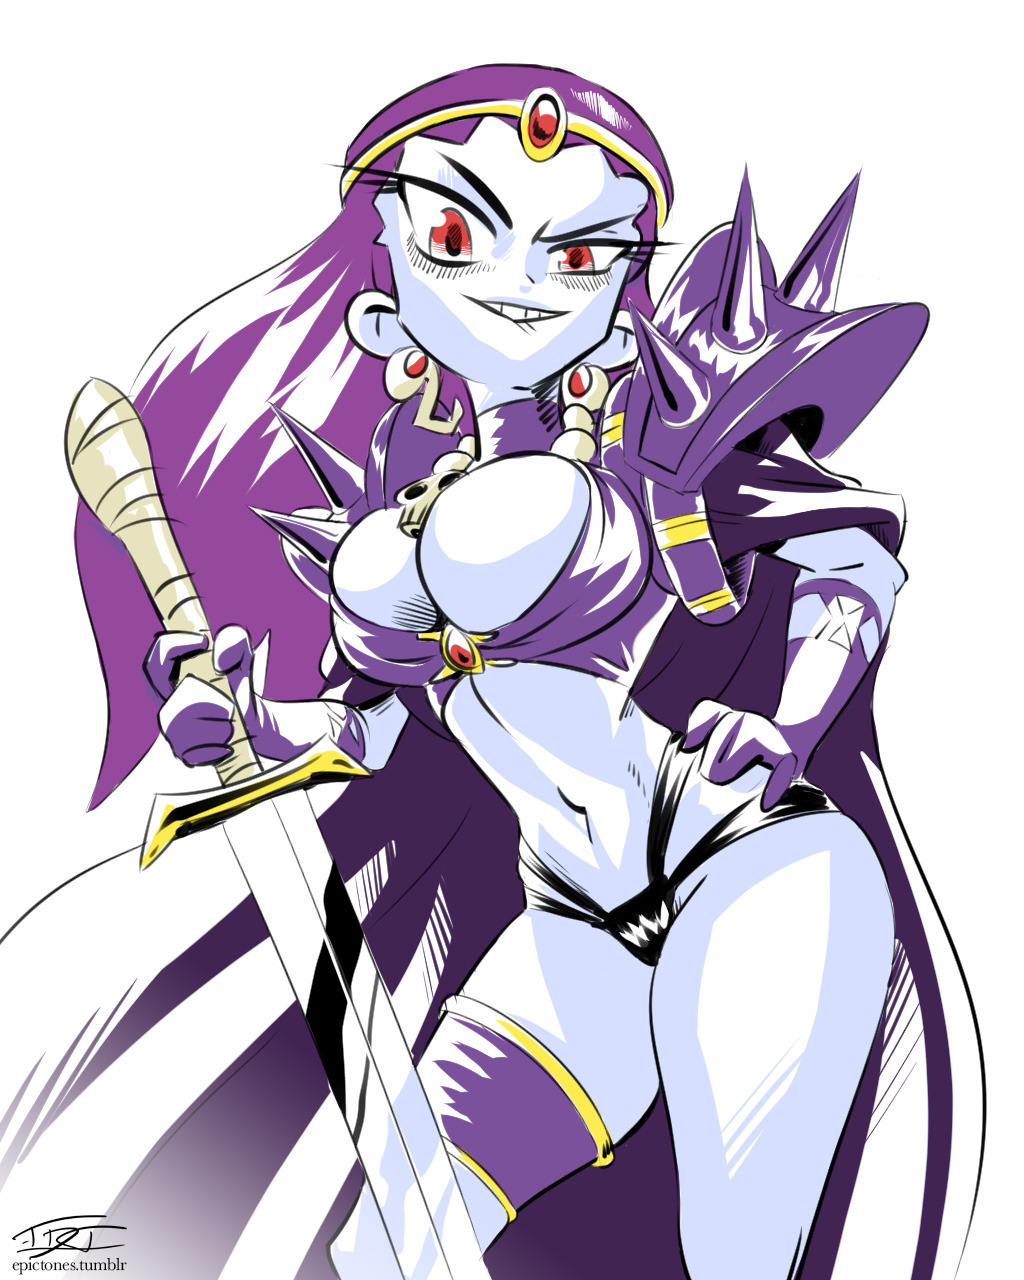 epictones:  I had to roll up a Shantae as Lina Inverse to match the Risky as Naga